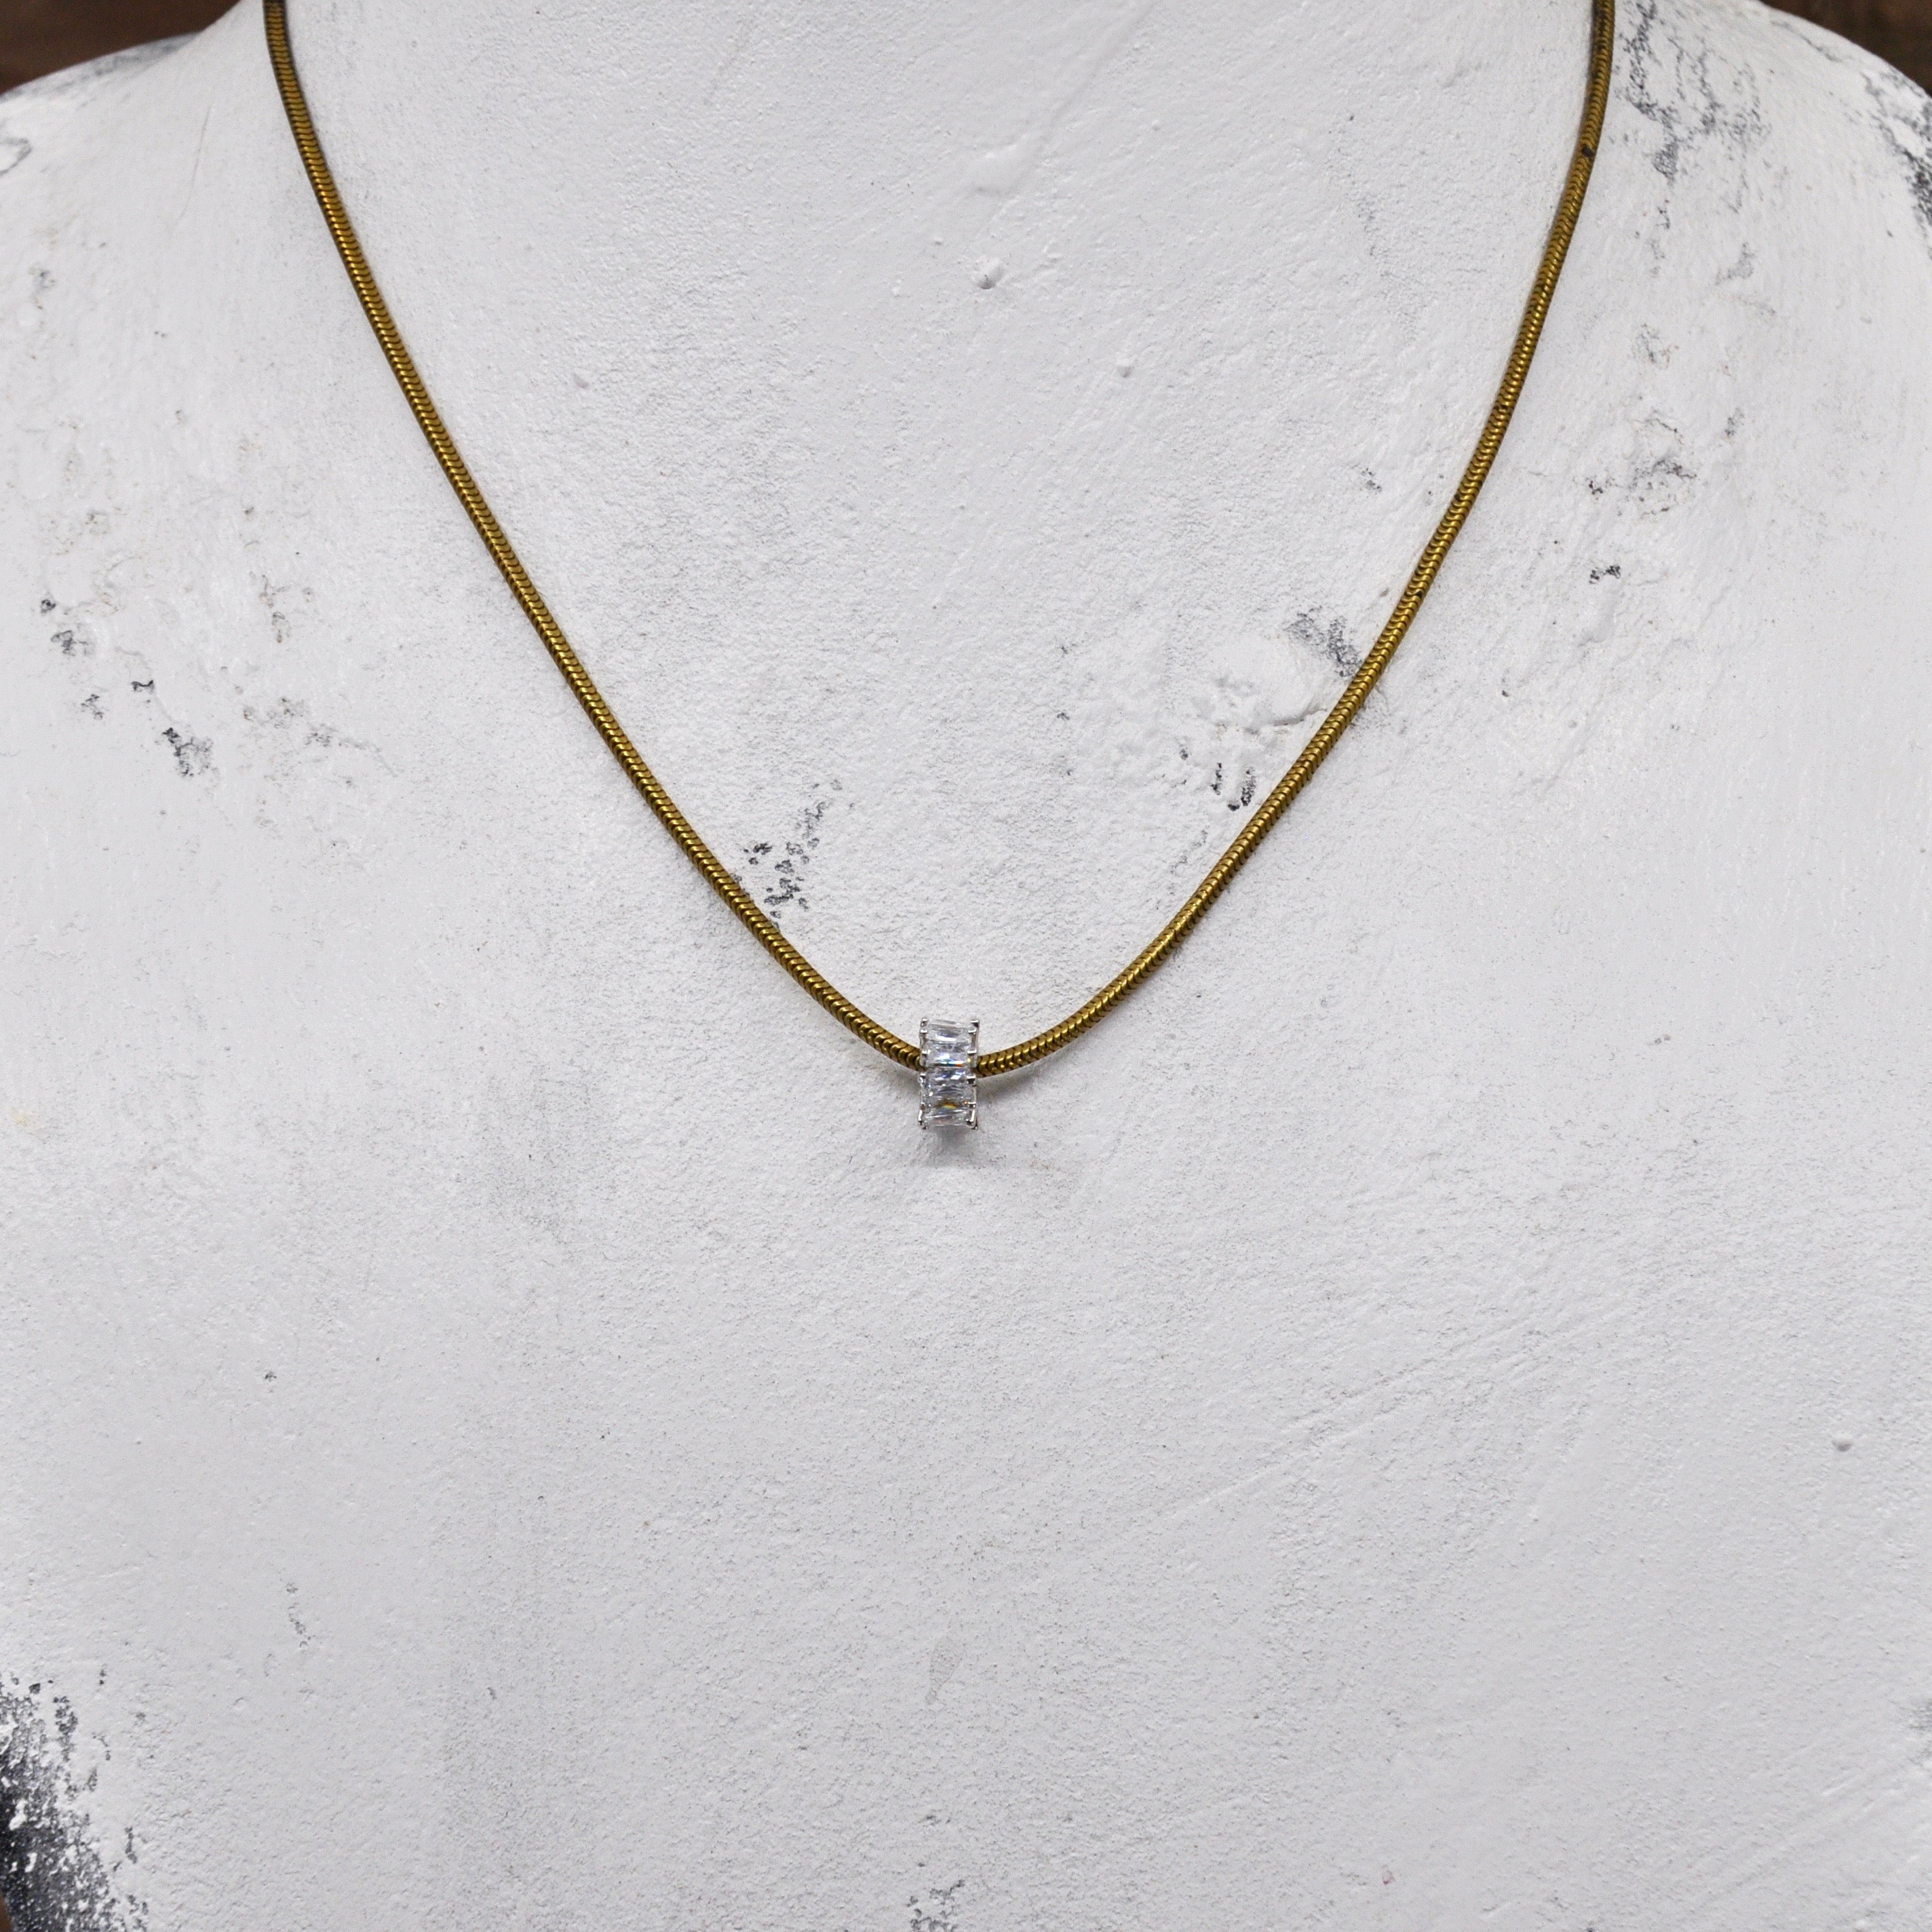 Vintage Snake Layering Chain with Pave Bead